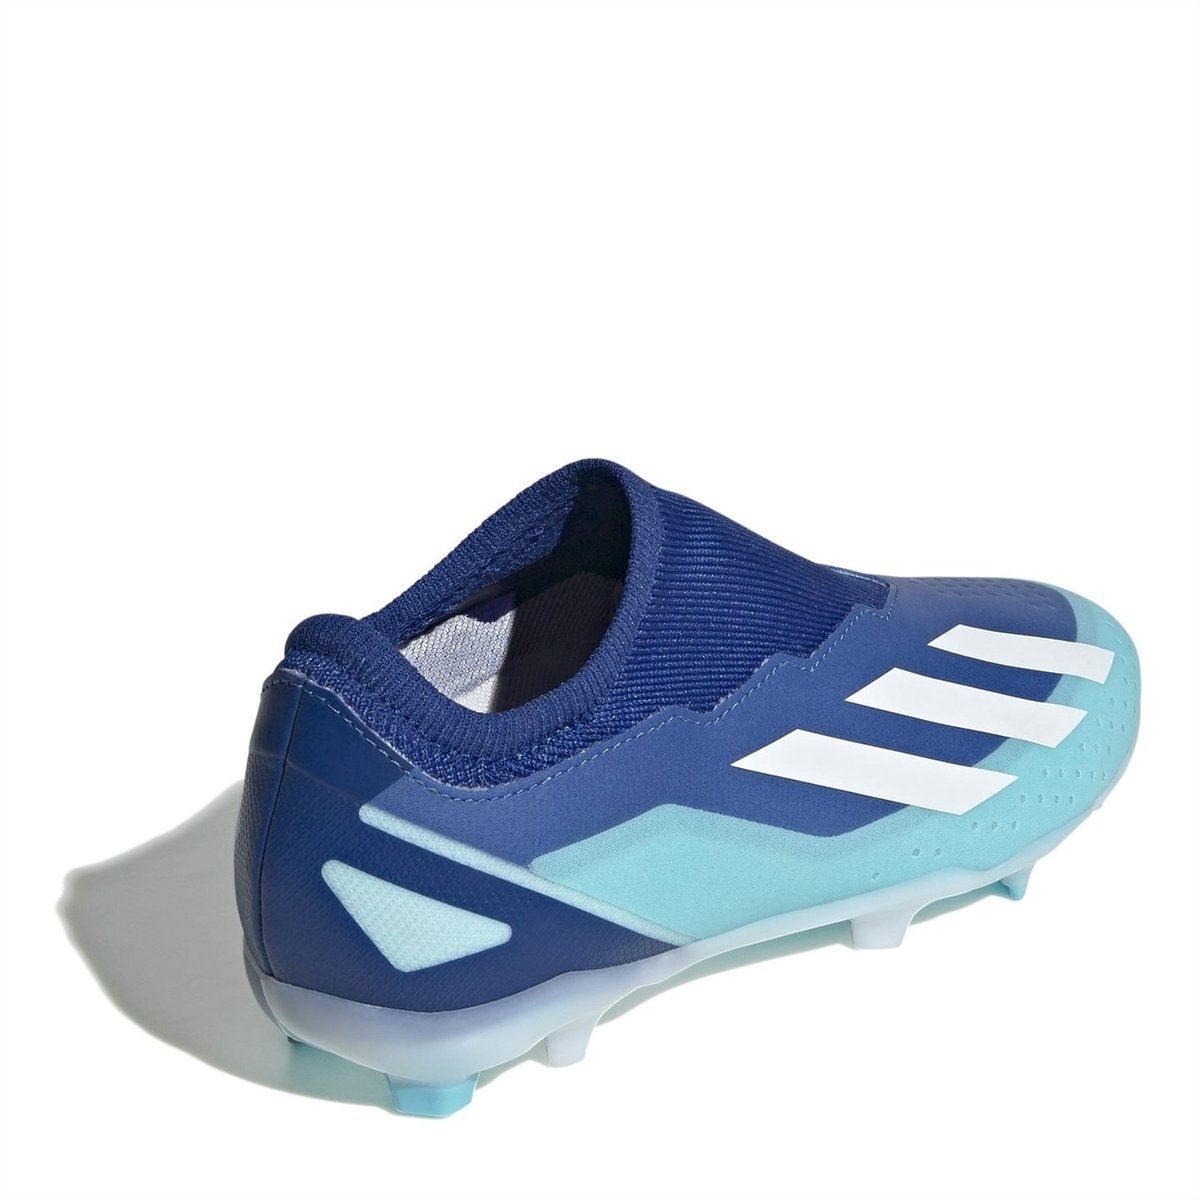 adidas X CrazyFast .3 Laceless Childrens Firm Ground Football Boots Blue/White, £55.00